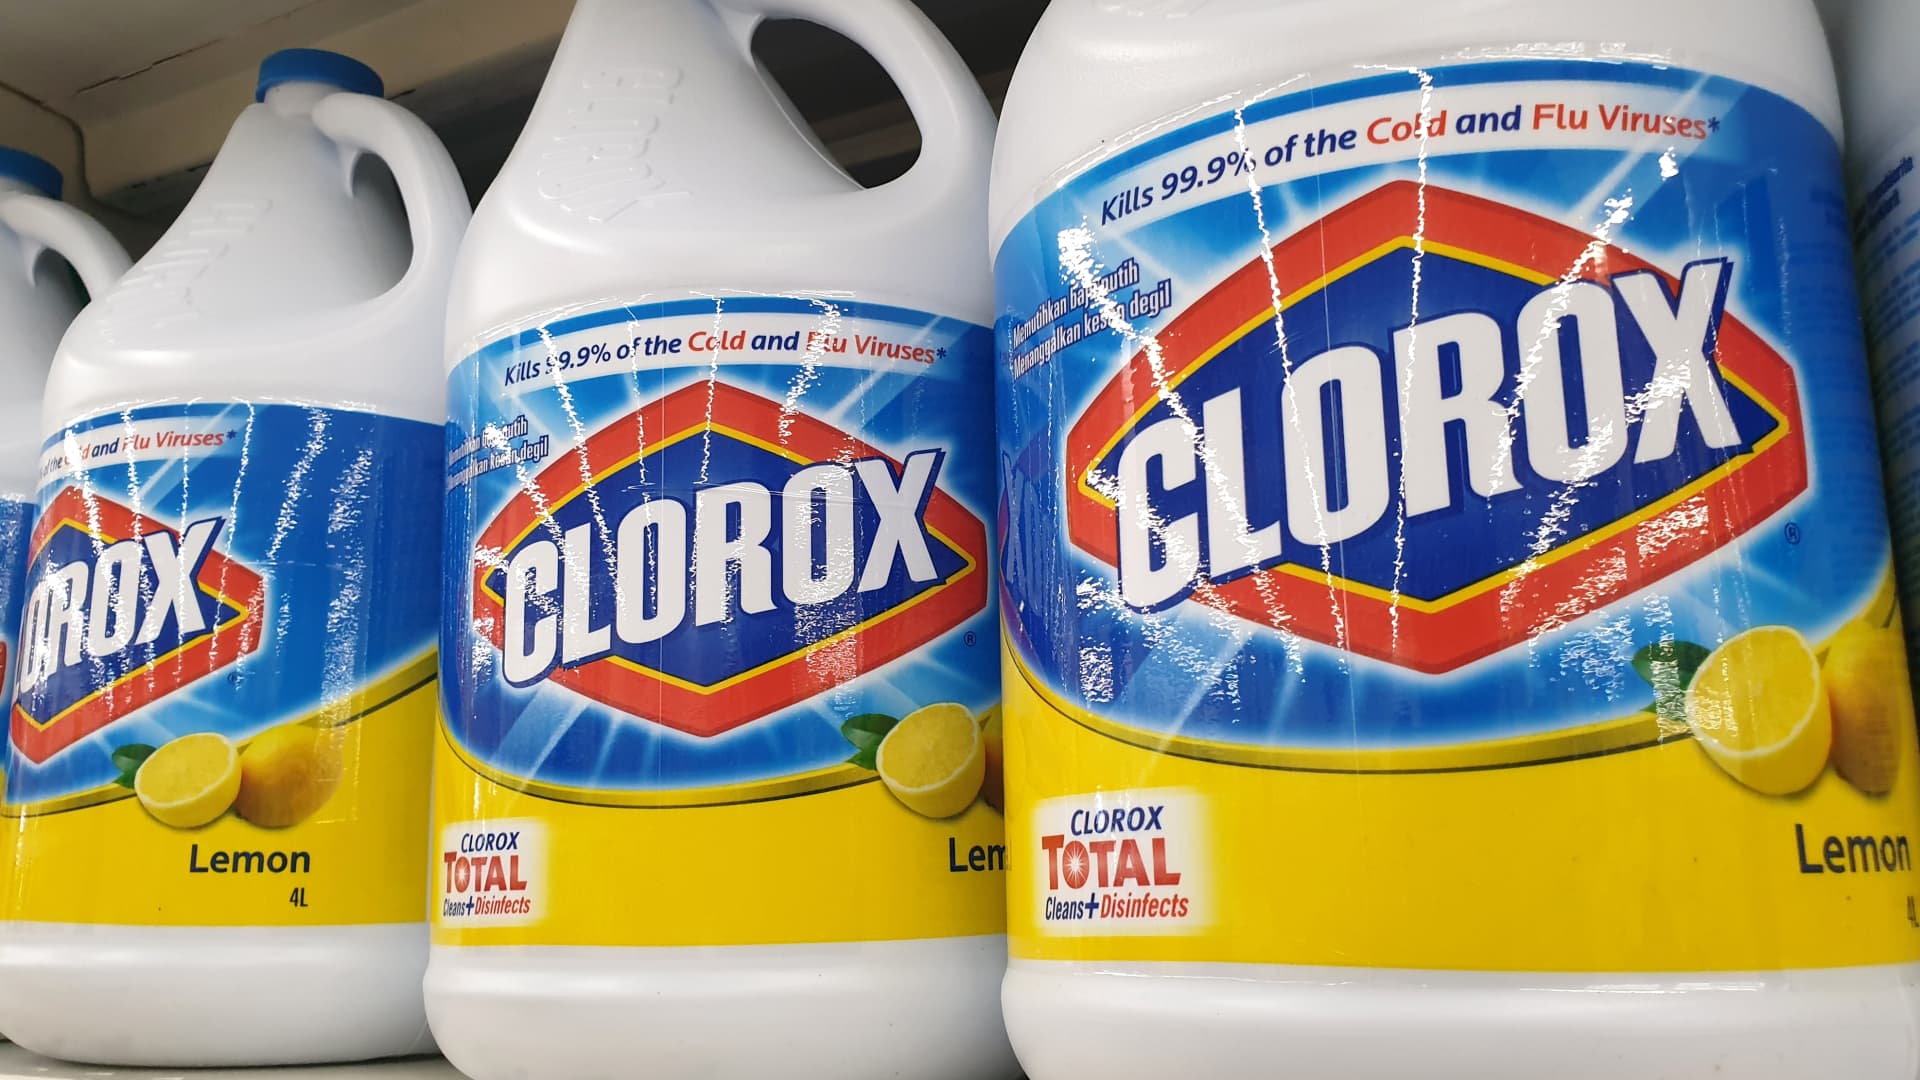 Clorox’s brands are inflation-proof and can thrive in recessions, CEO says